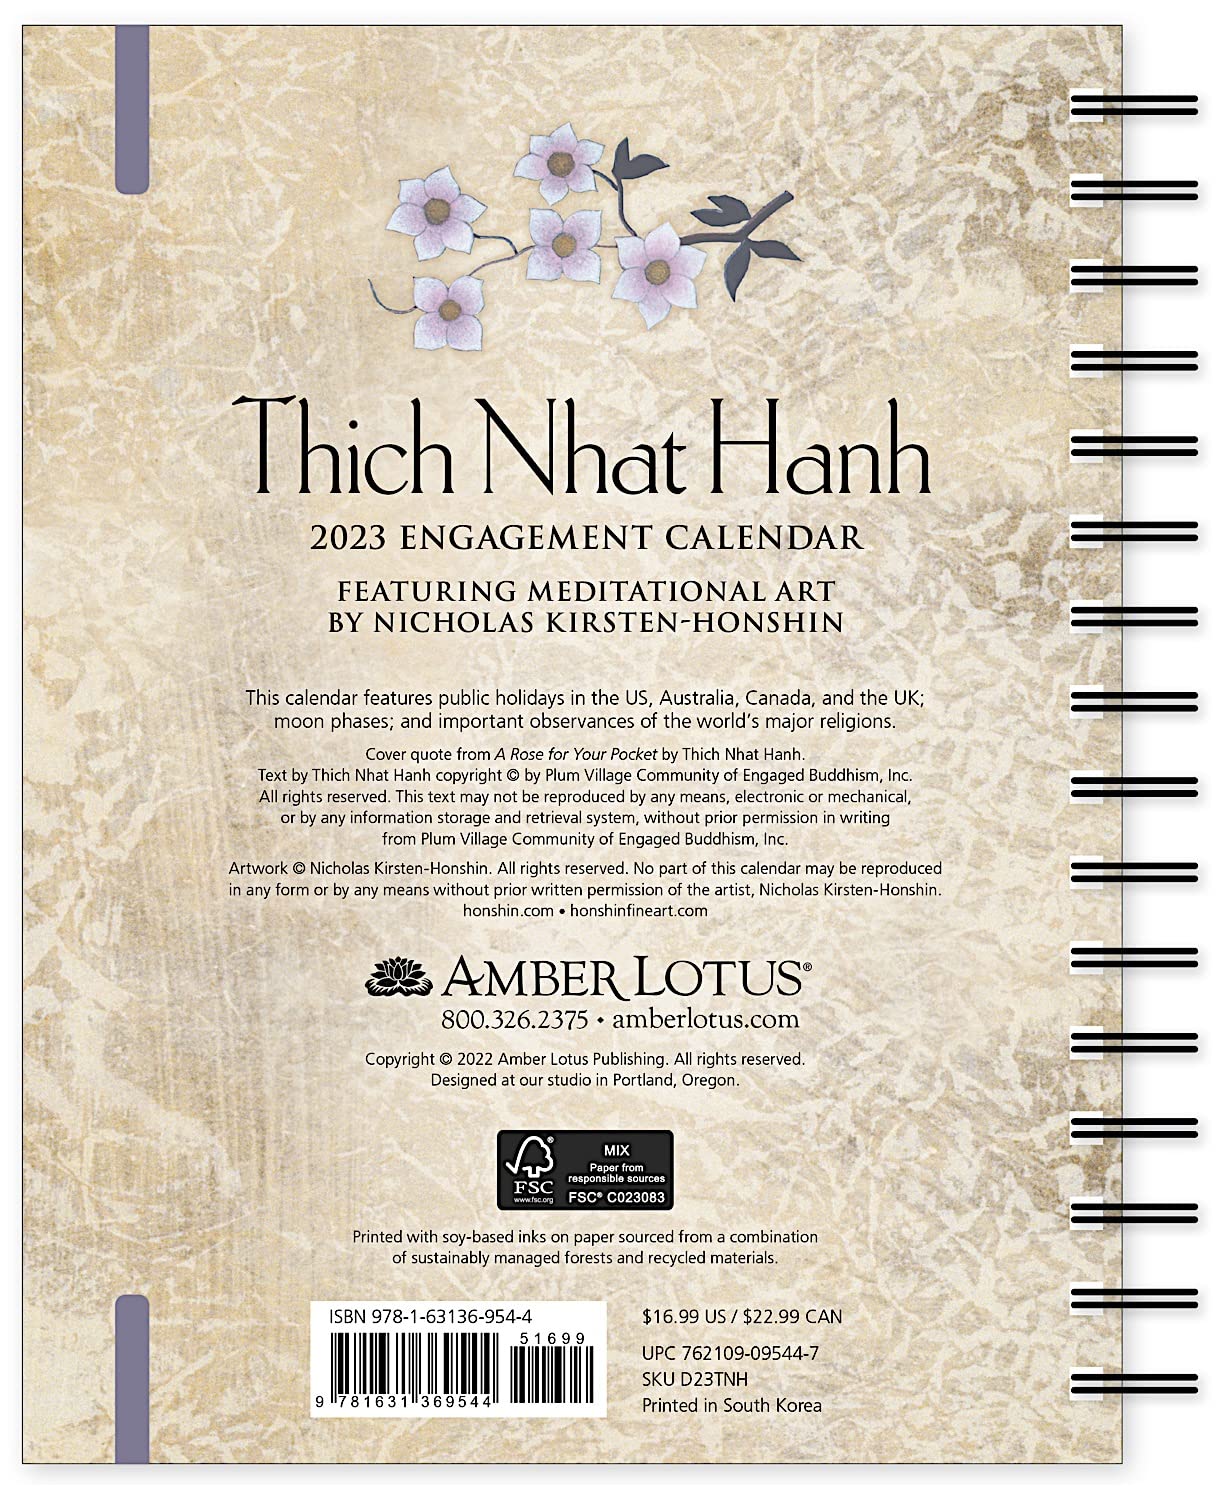 thich-nhat-hanh-calendar-2023-customize-and-print